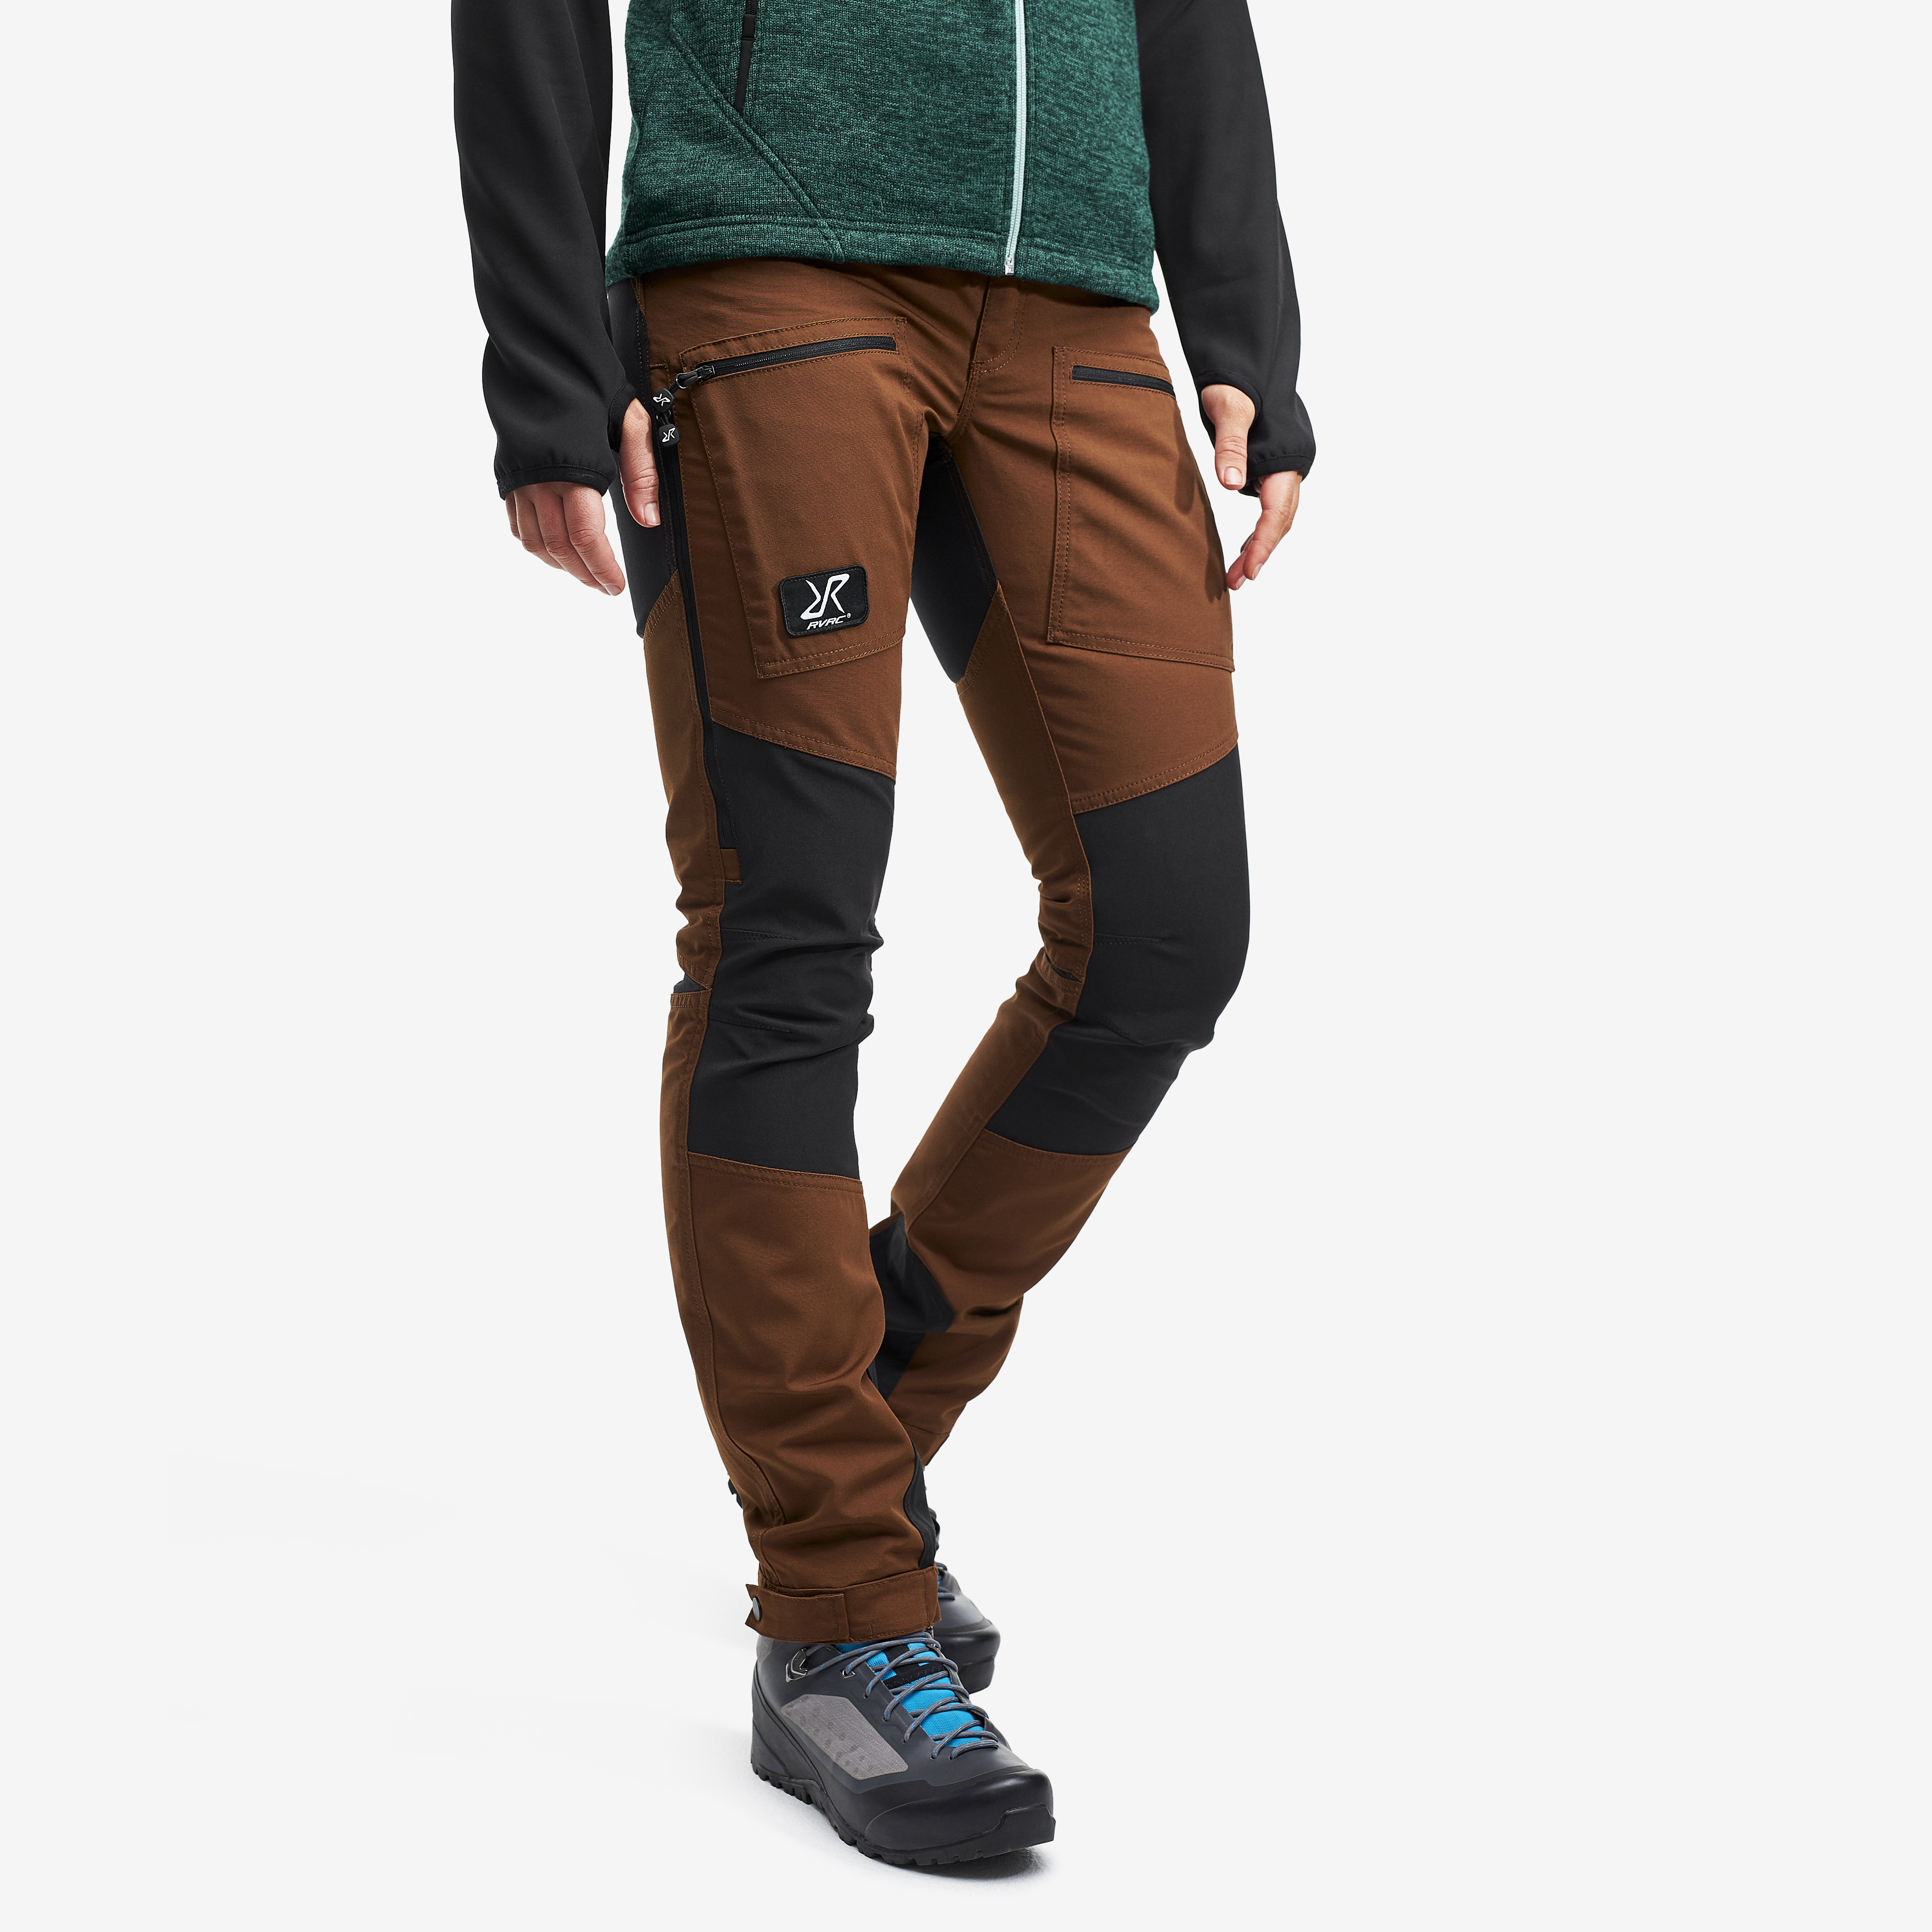 Nordwand Pro Pants Espresso Brown